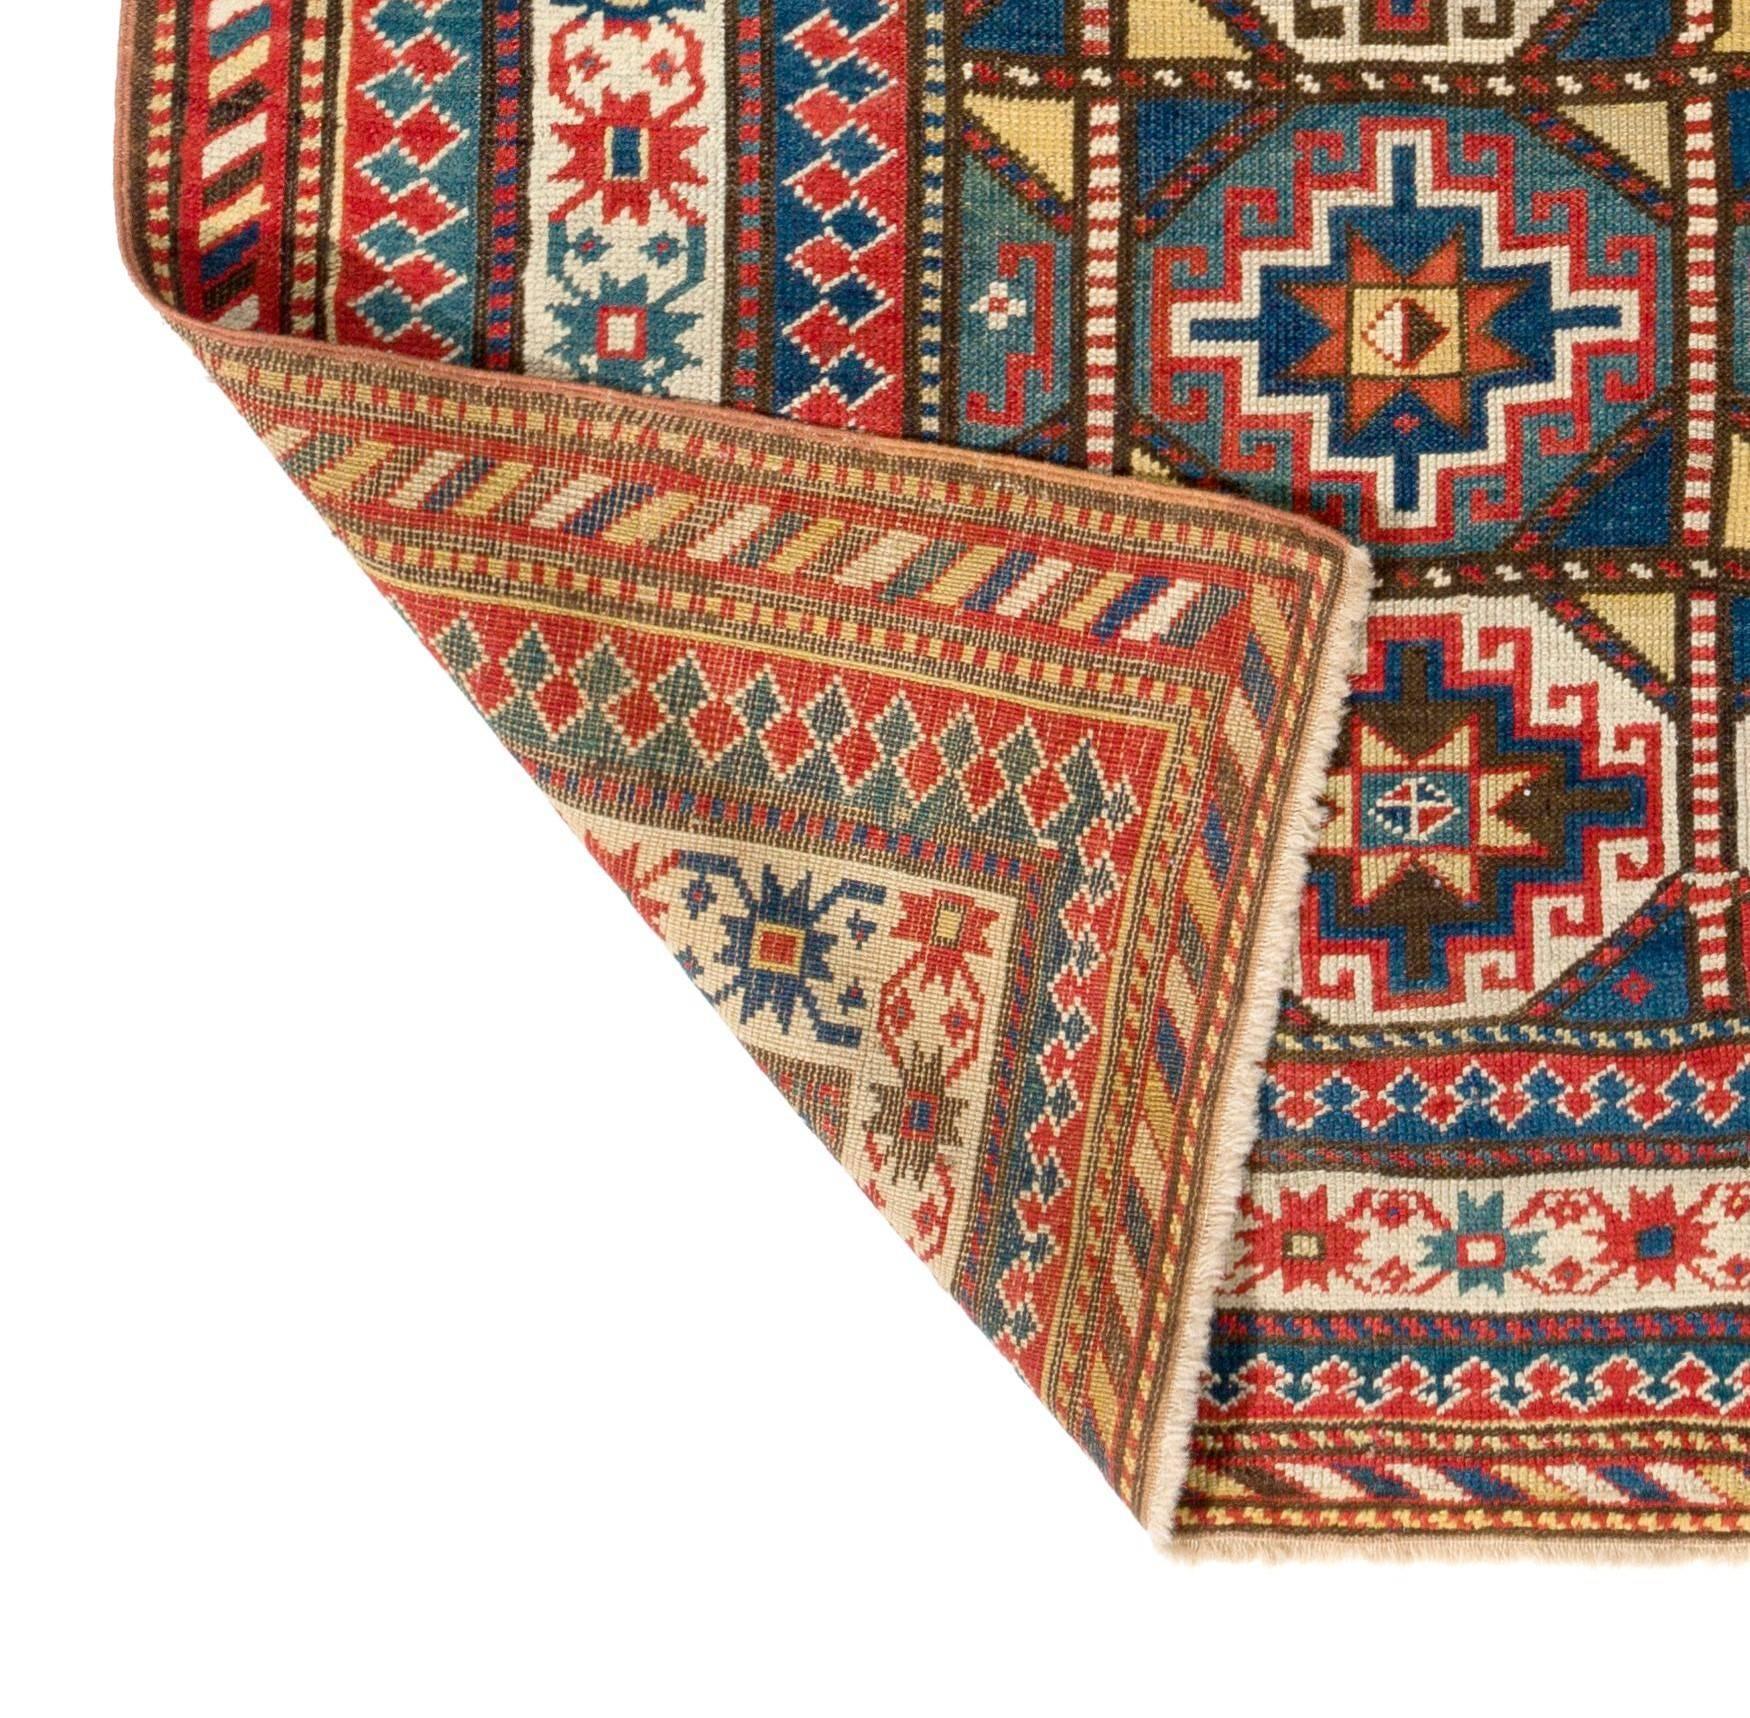 Antique Caucasian Gendje Rug, circa 1875
Very good condition, 100% wool and all natural dyes.